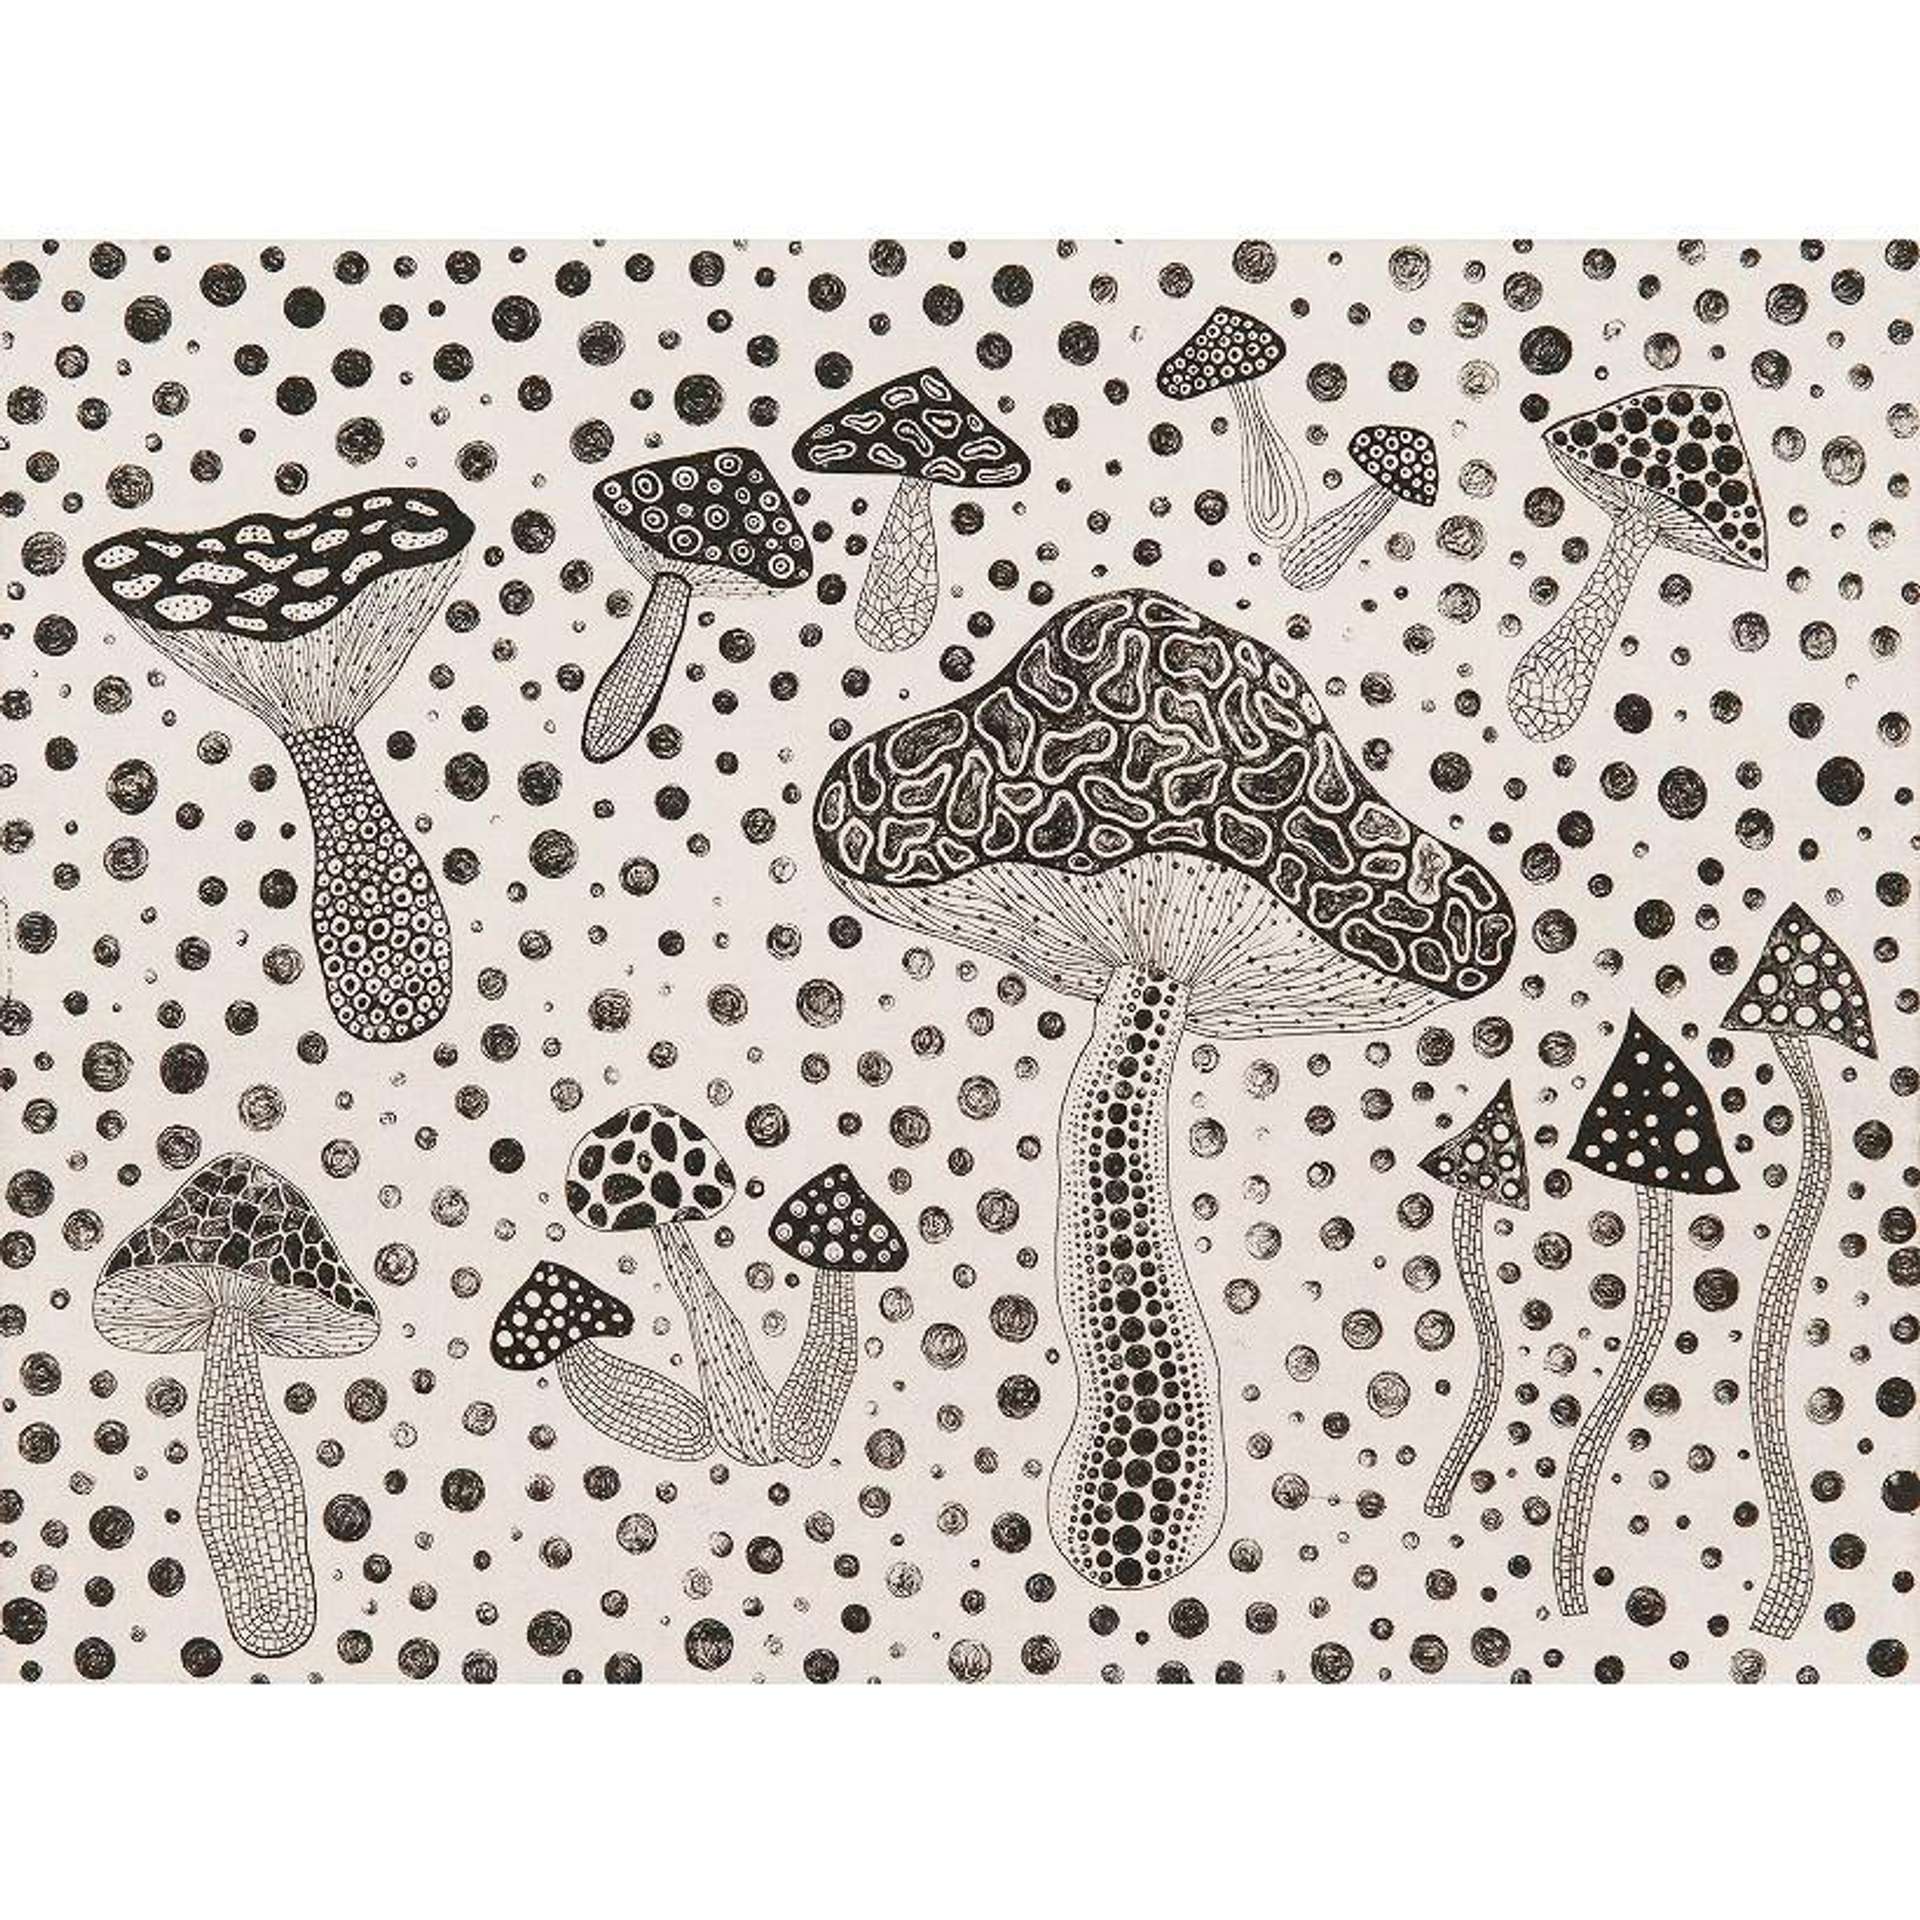 An etching by Yayoi Kusama depicting 14 monochromatic mushrooms against a white background with black polka dots